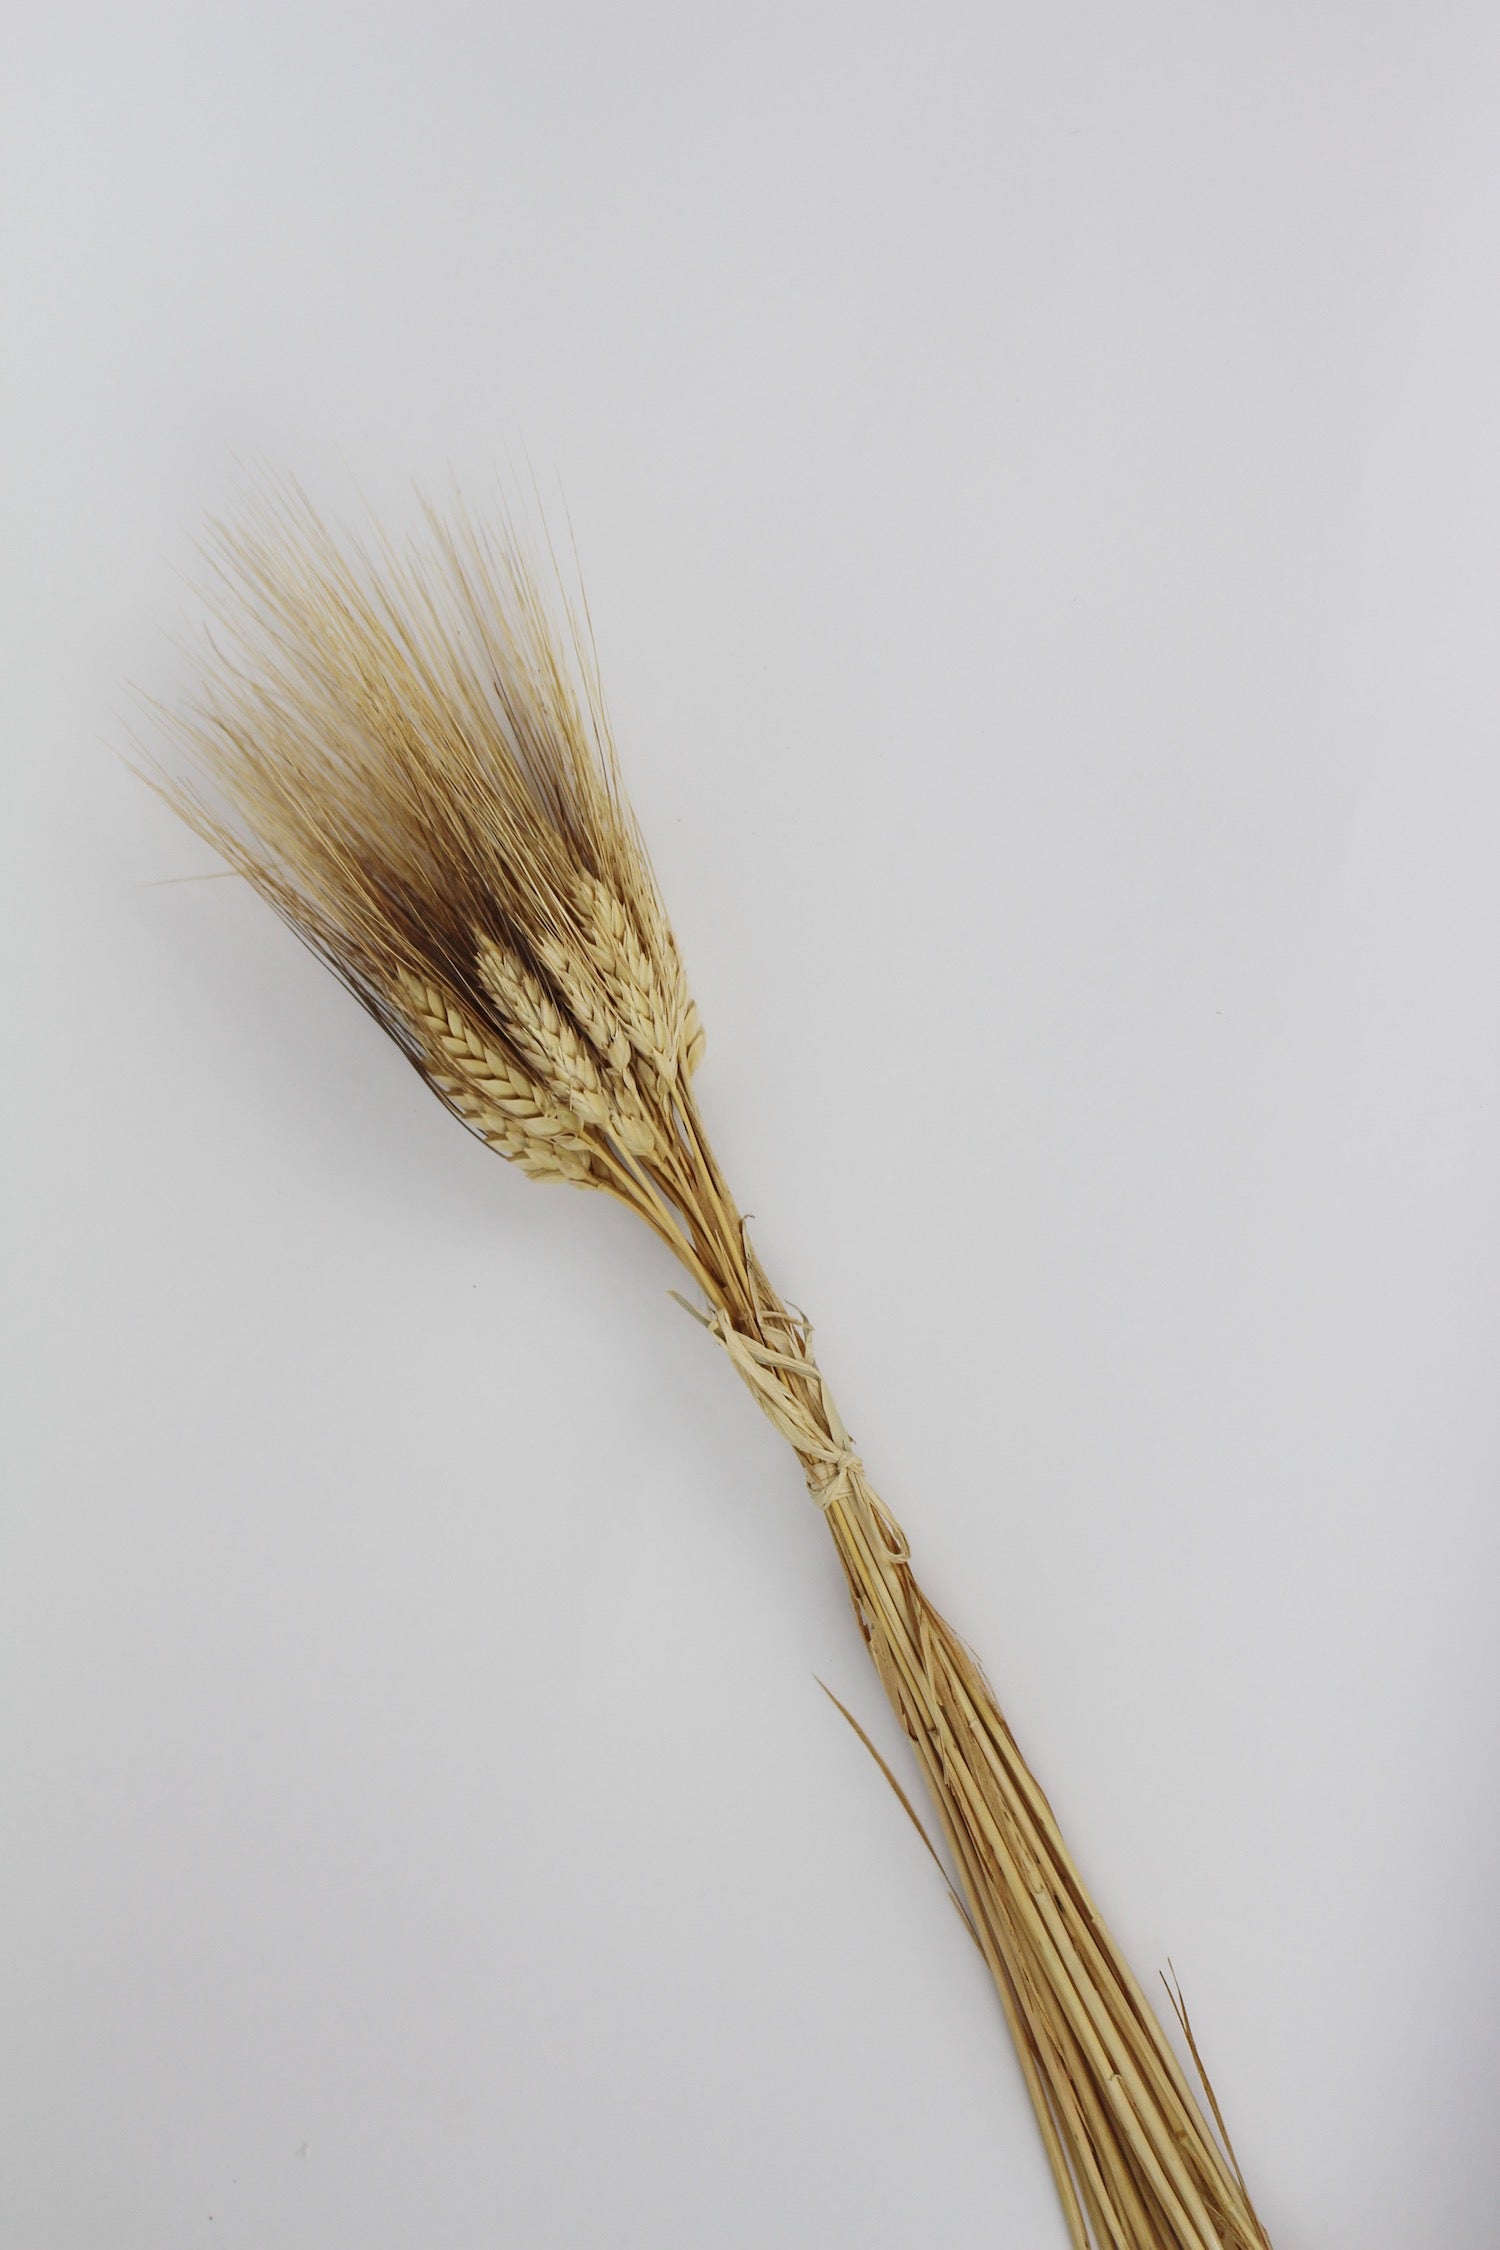 Dried Flowers Wheat Dried Flowers Une Vie Nomade Brand_Une Vie Nomade Home_Decor New Arrivals wholesaledriedflowerswheat